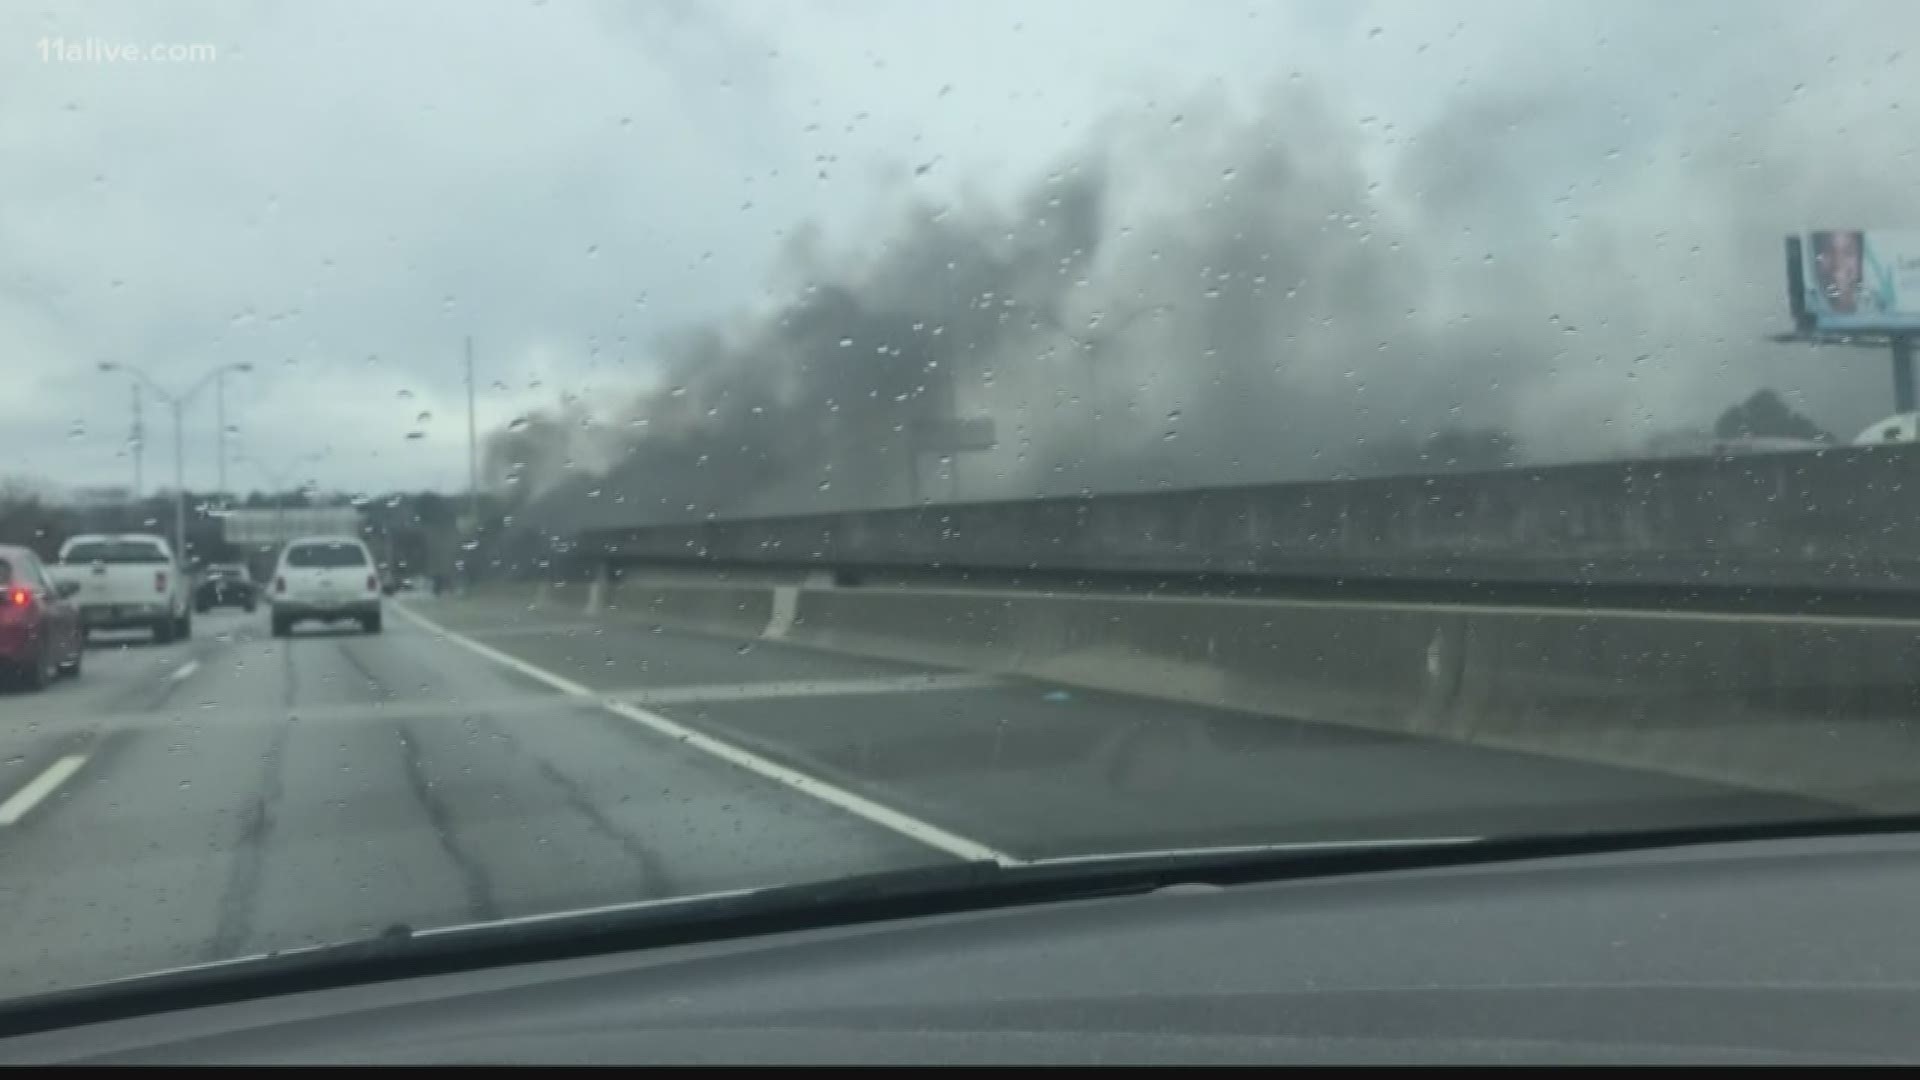 Another fire broke out under Interstate 85 in Atlanta, after a similar incident earlier in the week.